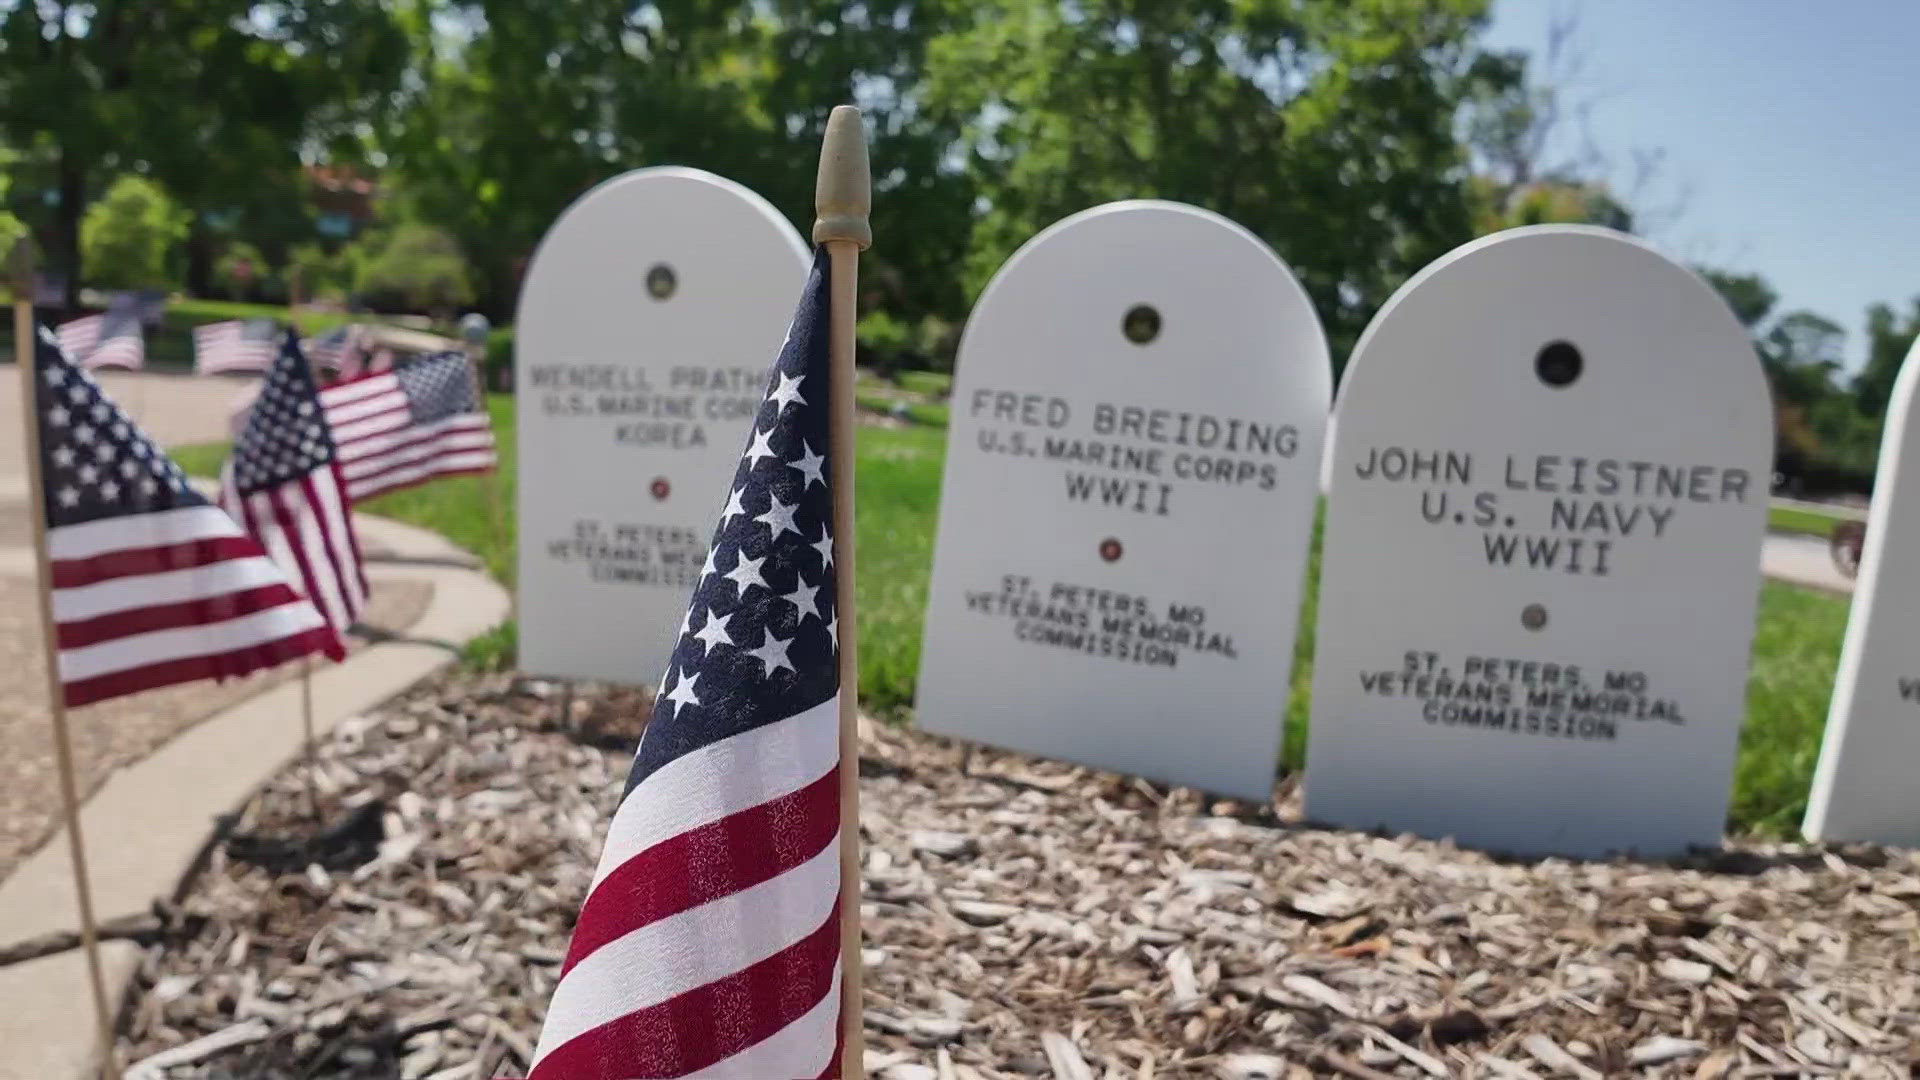 The St. Louis area will host several parades and memorial ceremonies to honor the nation's fallen service members throughout Memorial Day weekend.